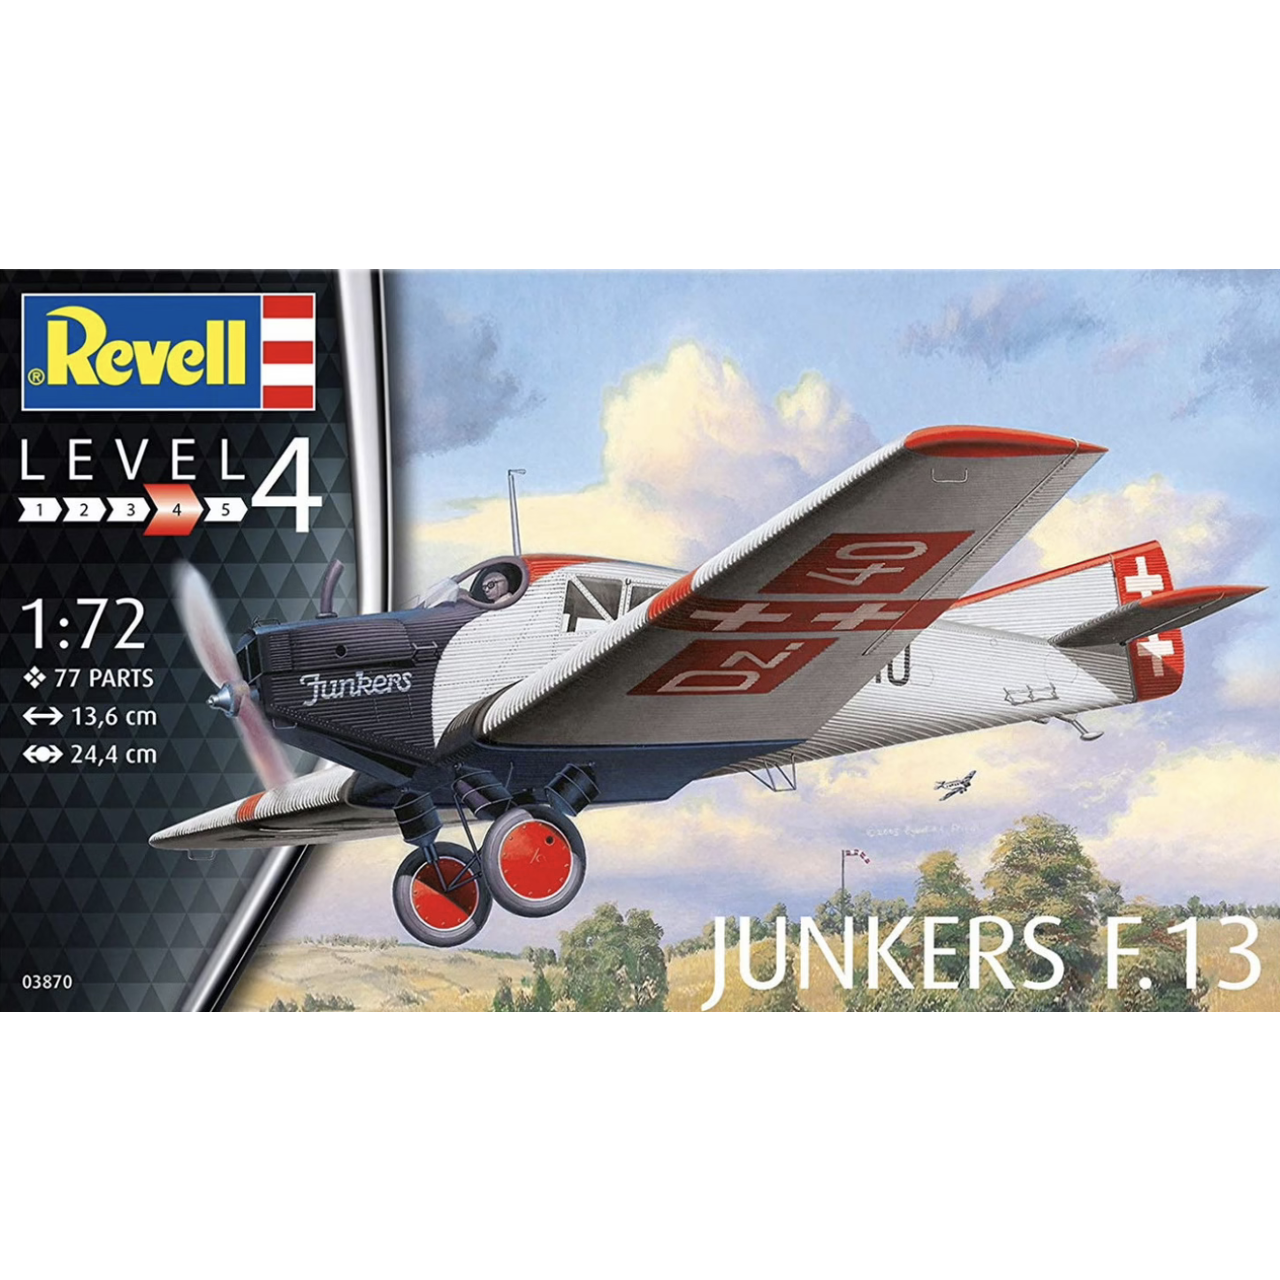 Junkers F.13 1/72 #03870 by Revell